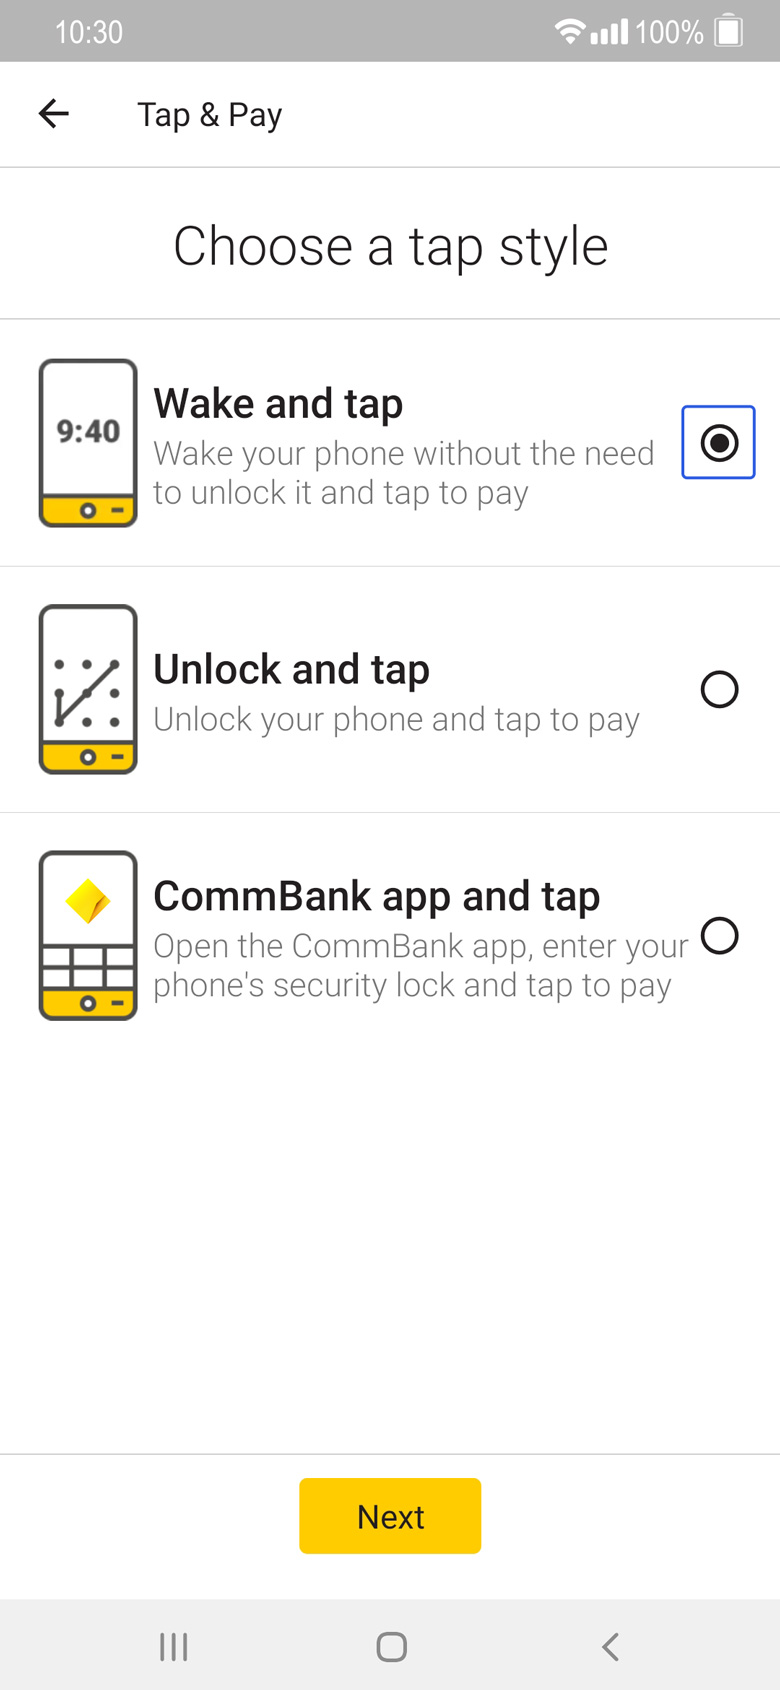 CommBank app 'Choose a tap style' screen